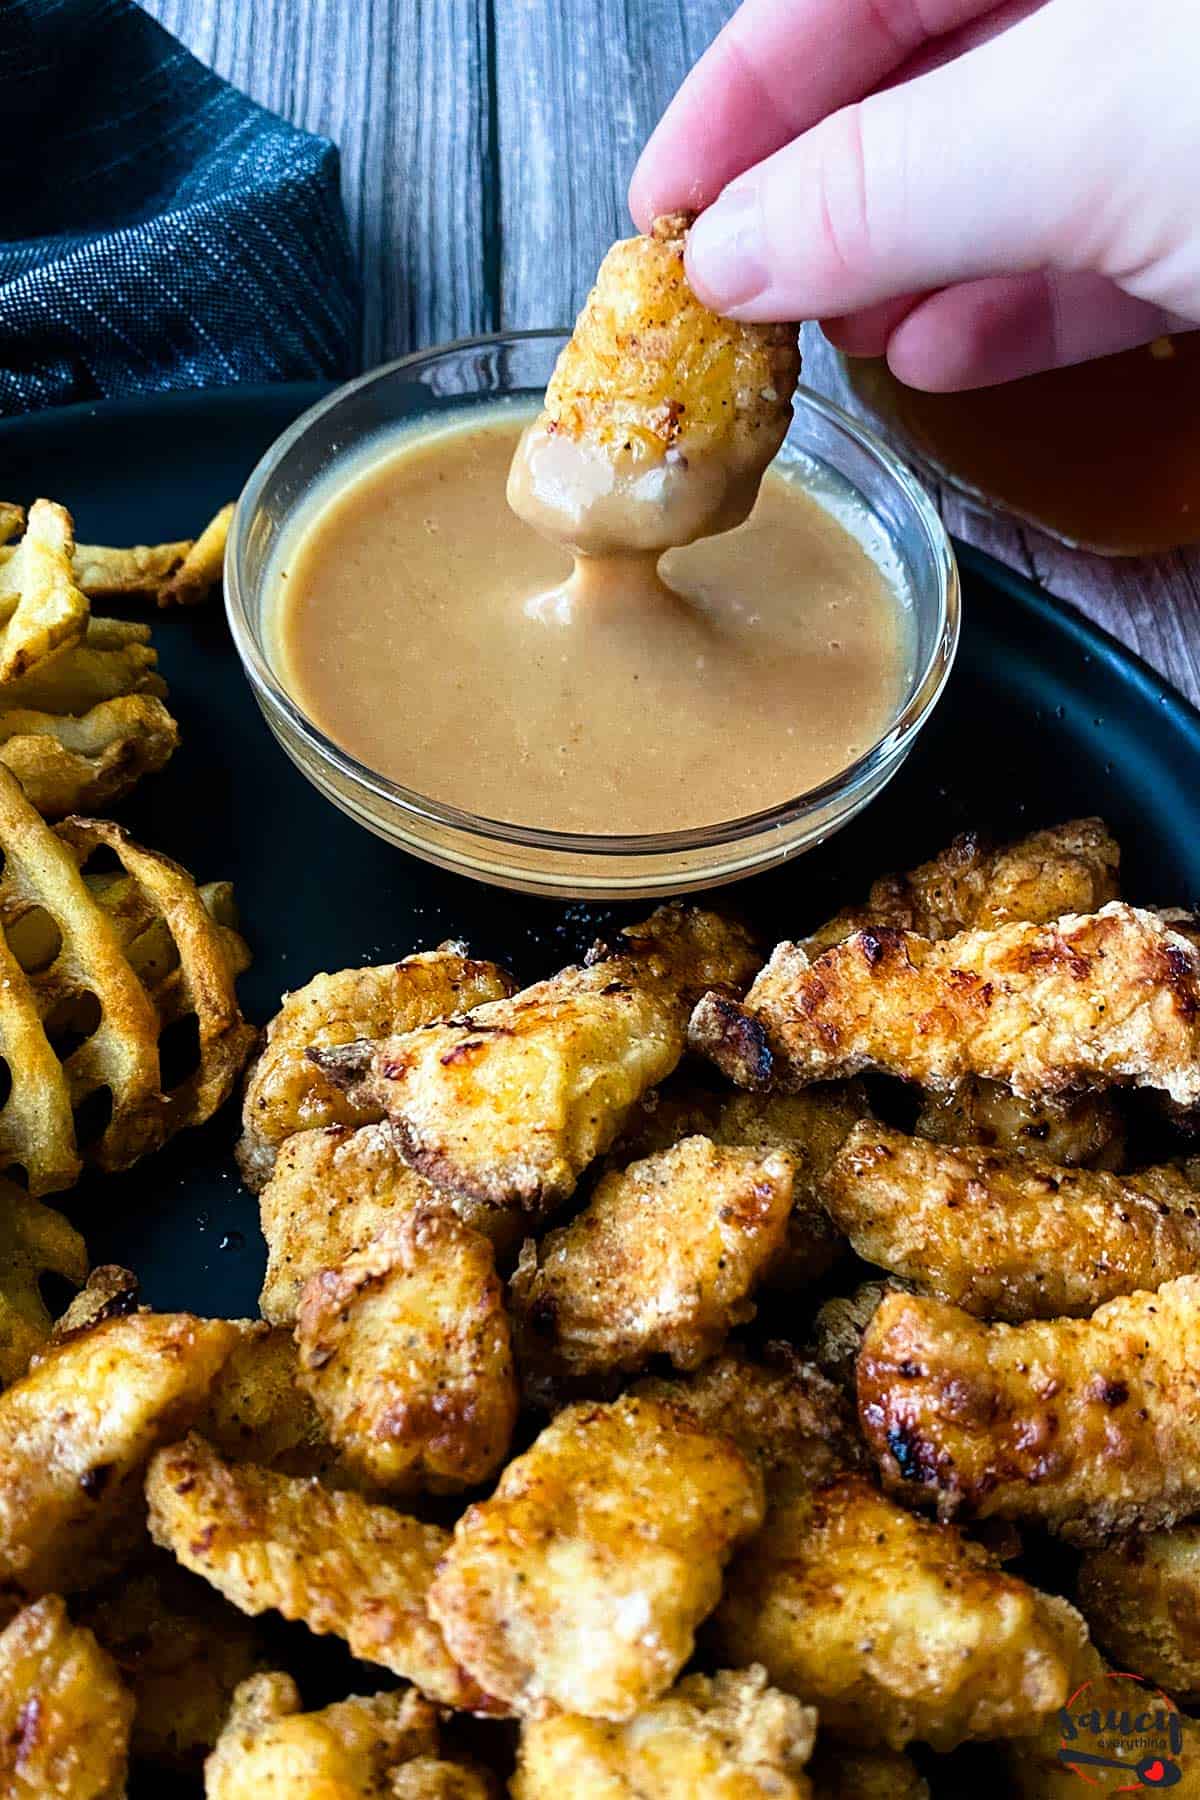 Chick-fil-a sauce in a bowl next to nuggets and waffle fries, dipping a nugget in the sauce